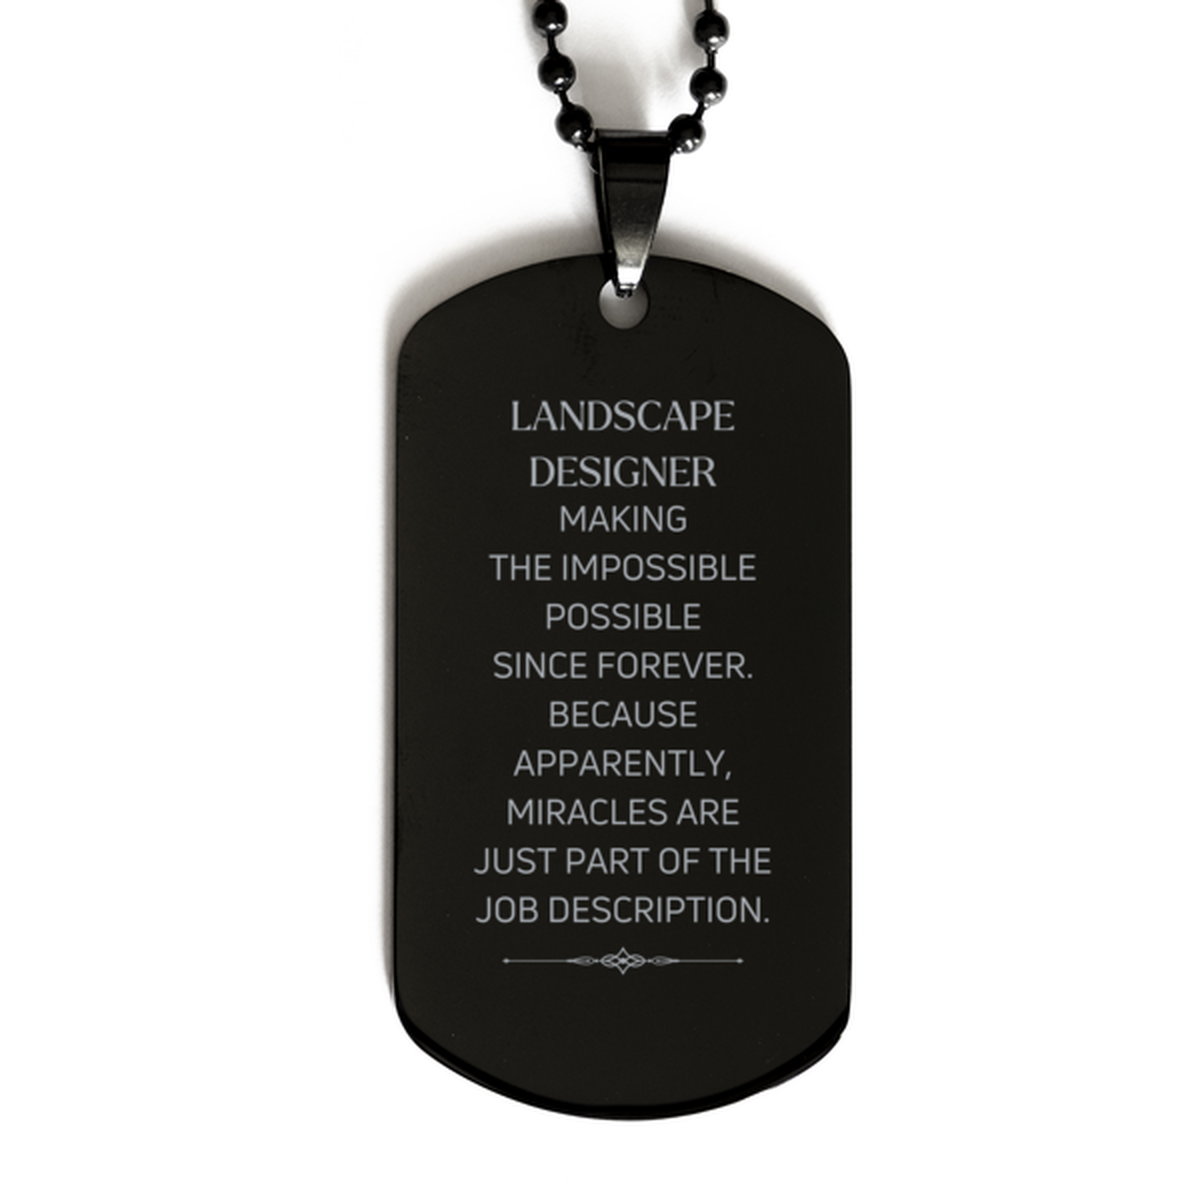 Funny Landscape Designer Gifts, Miracles are just part of the job description, Inspirational Birthday Black Dog Tag For Landscape Designer, Men, Women, Coworkers, Friends, Boss